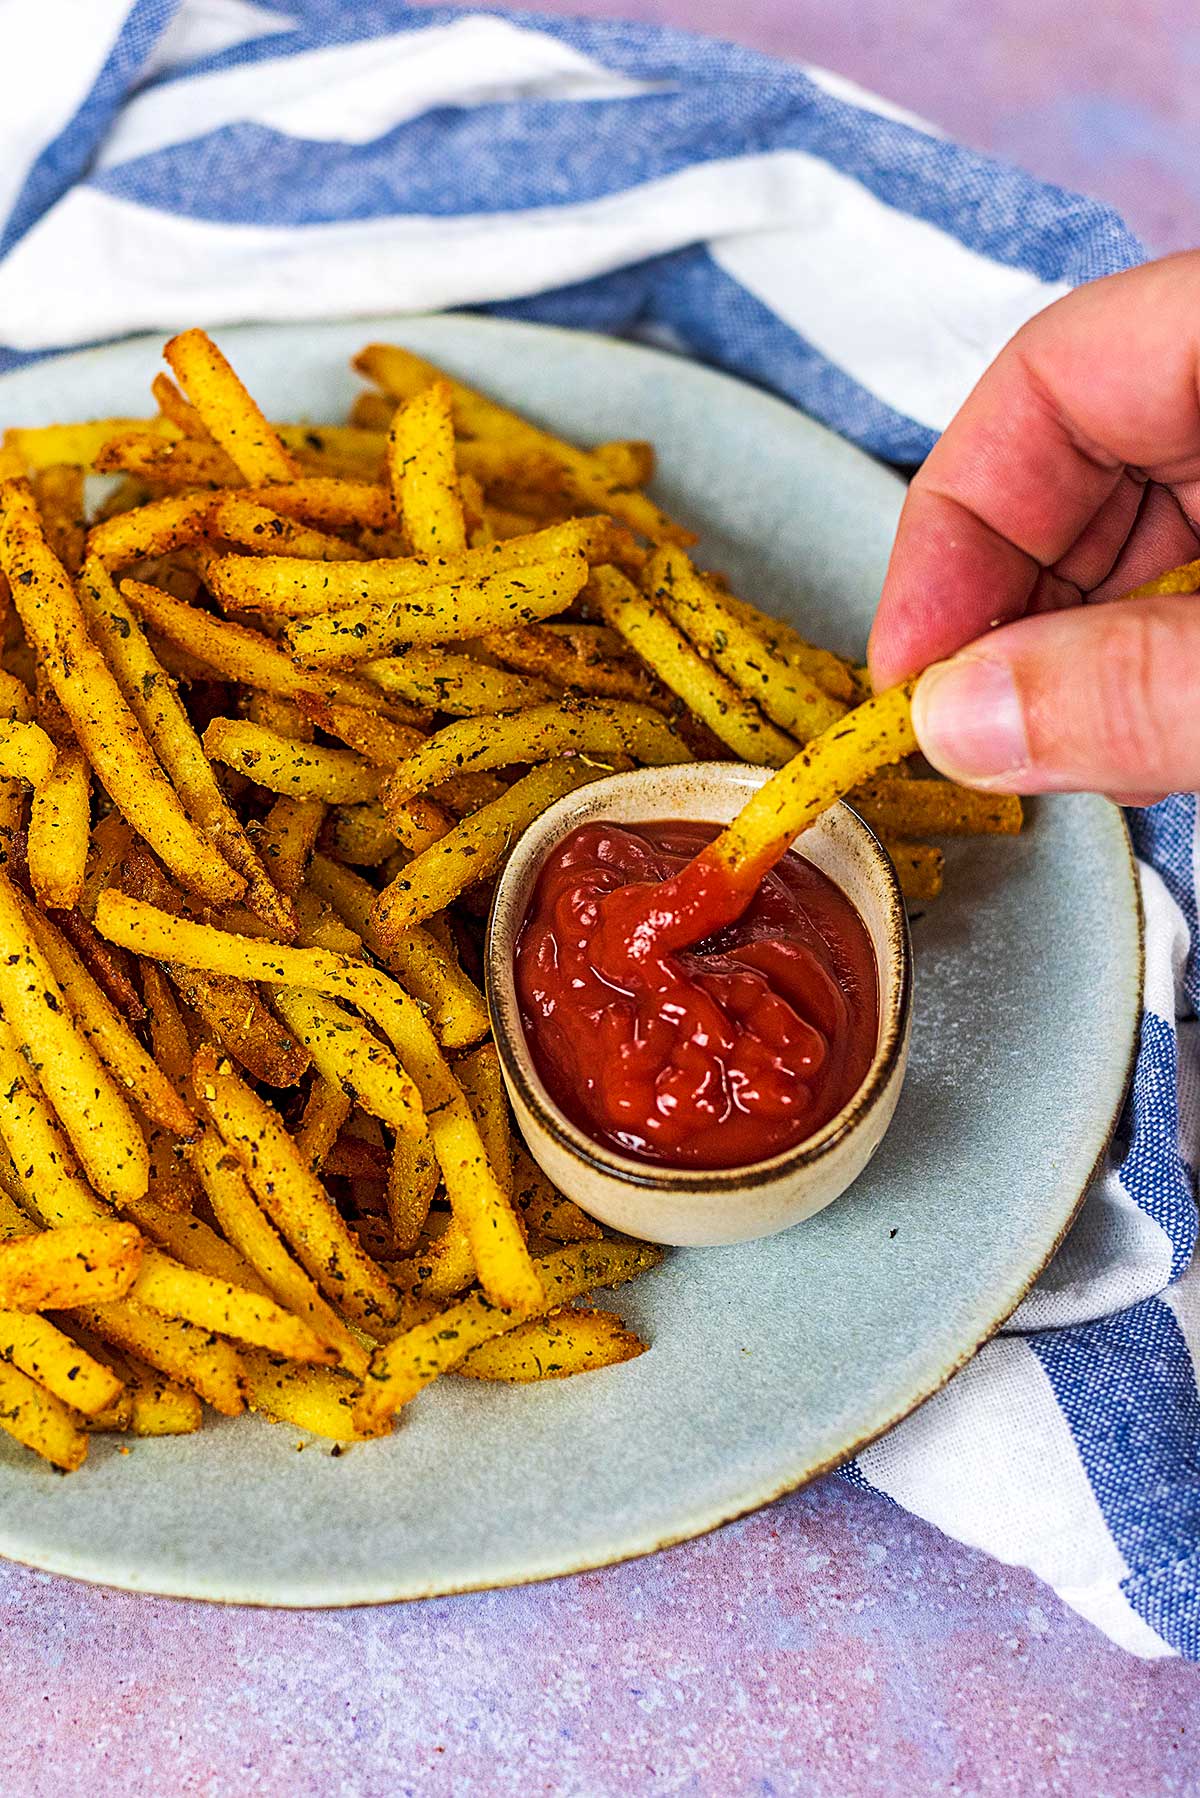 A hand dipping a French fry into some ketchup.